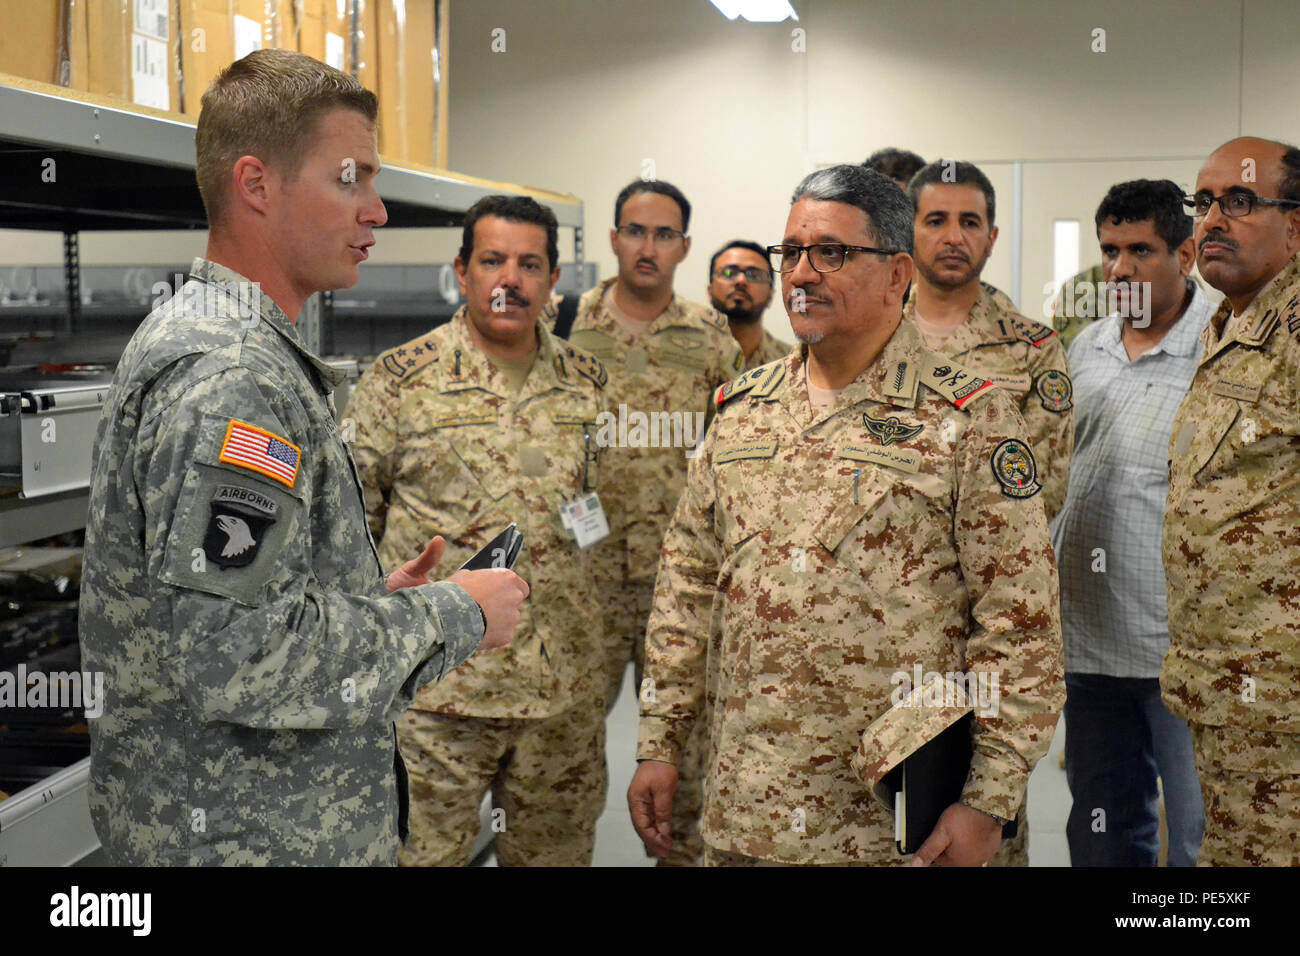 Chief Warrant Officer 2 David Marschall, left, shops aviation maintenance technician, Company B, 404th Aviation Support Battalion, 4th Combat Aviation Brigade, 4th Infantry Division, hosts Maj. Gen. Auda Mohammed Alshahrani, brigade commander of the Saudi Military, Saudi Arabian National Guard, and members of his staff for a tour of the various aviation maintenance and logistics officers during their visit to learn about brigade aviation maintenance and structure at Butts Army Airfield Sept. 23, 2015. (U.S. Army Photo by Sgt. Jonathan C. Thibault, 4th Combat Aviation Brigade Public Affairs Off Stock Photo